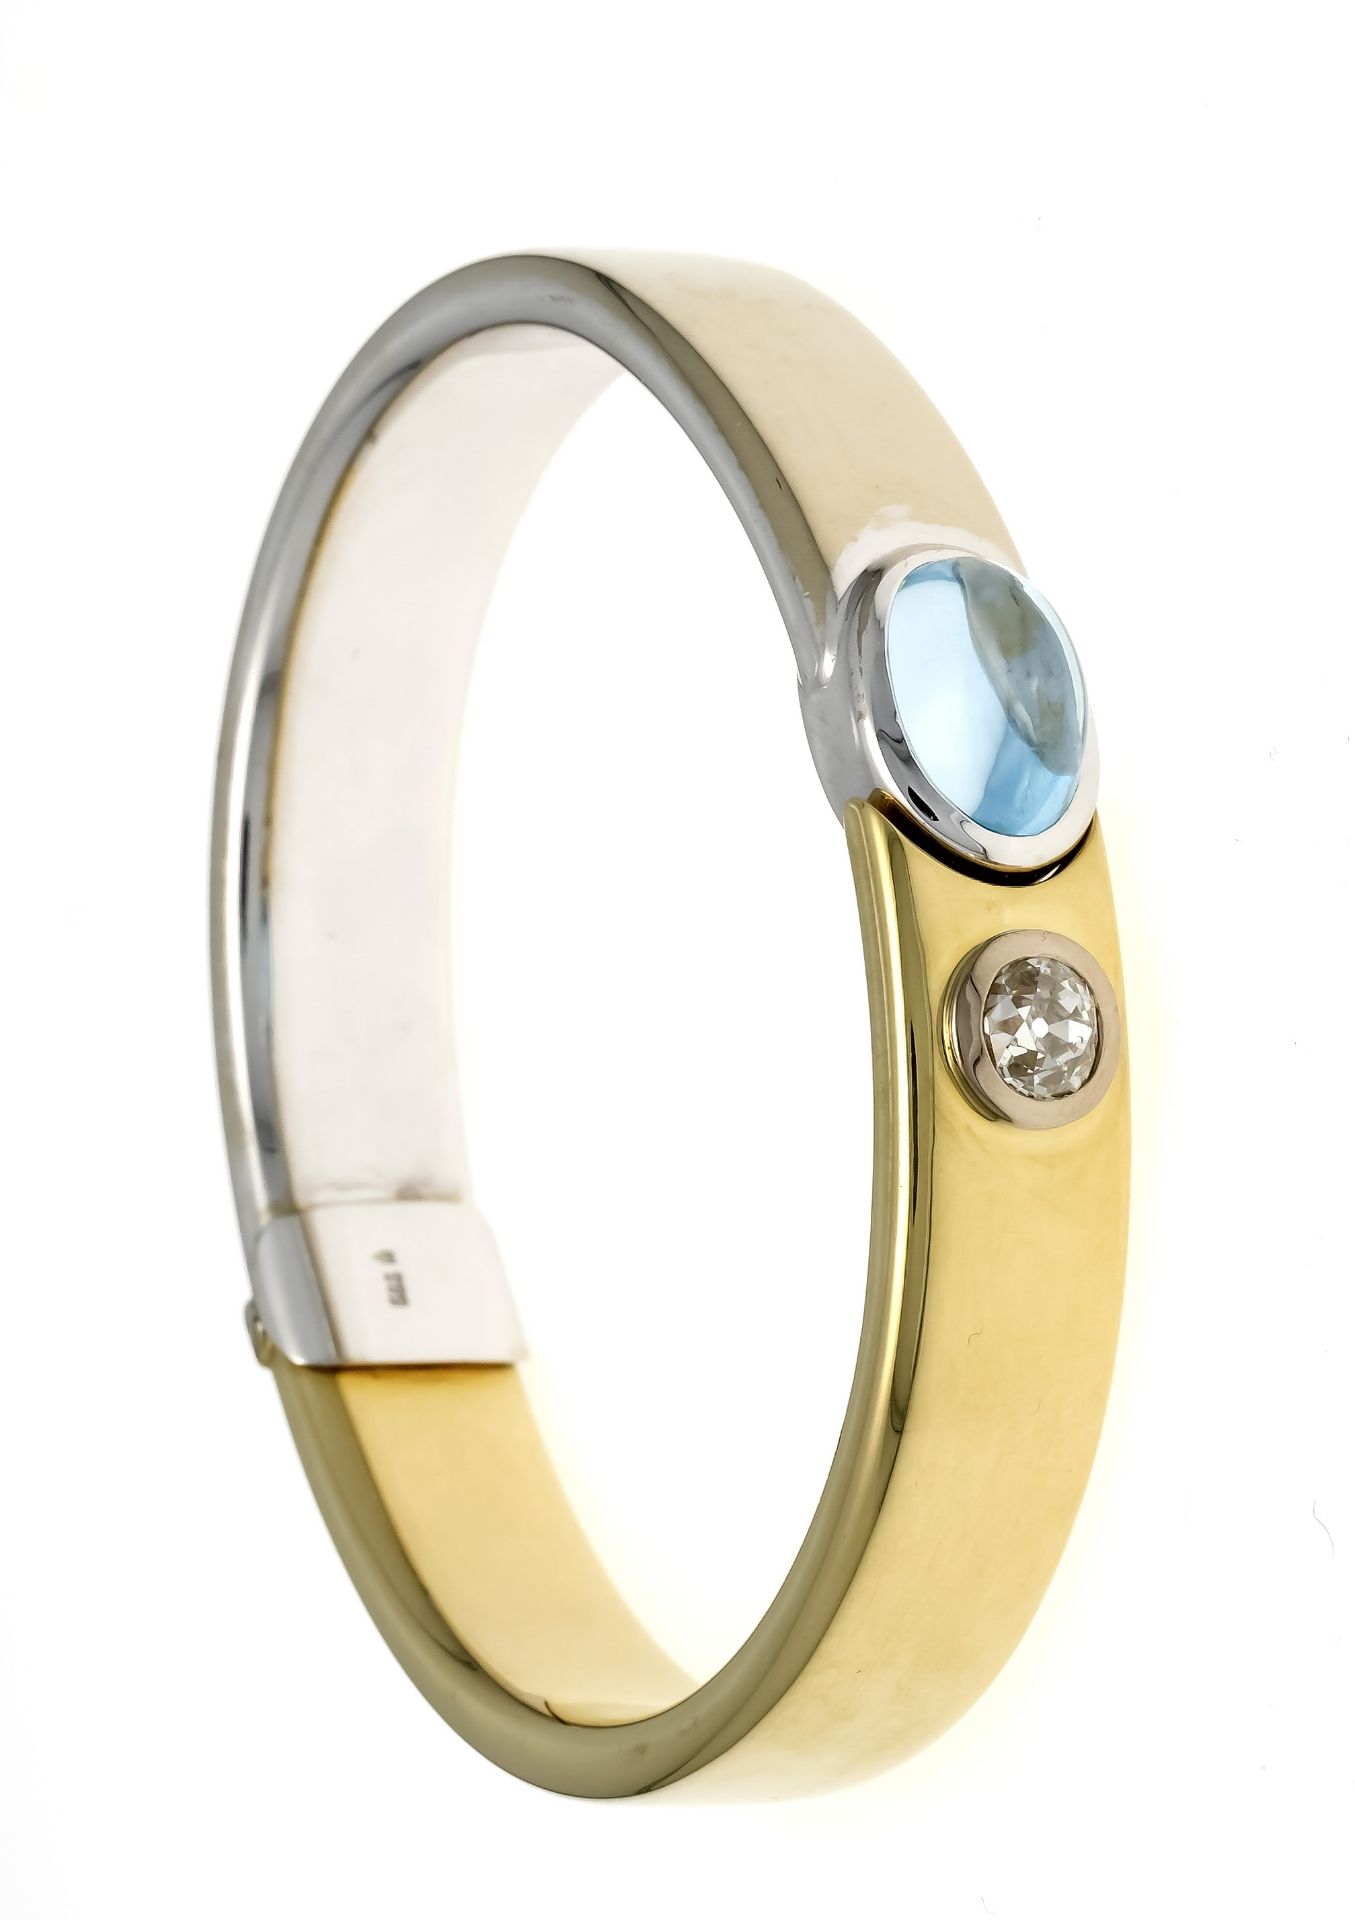 Bicolor blue topaz-brilliant bangle GG/WG 585/000 with an oval blue topaz cabochon 6.5 ct, 12 x 8 mm